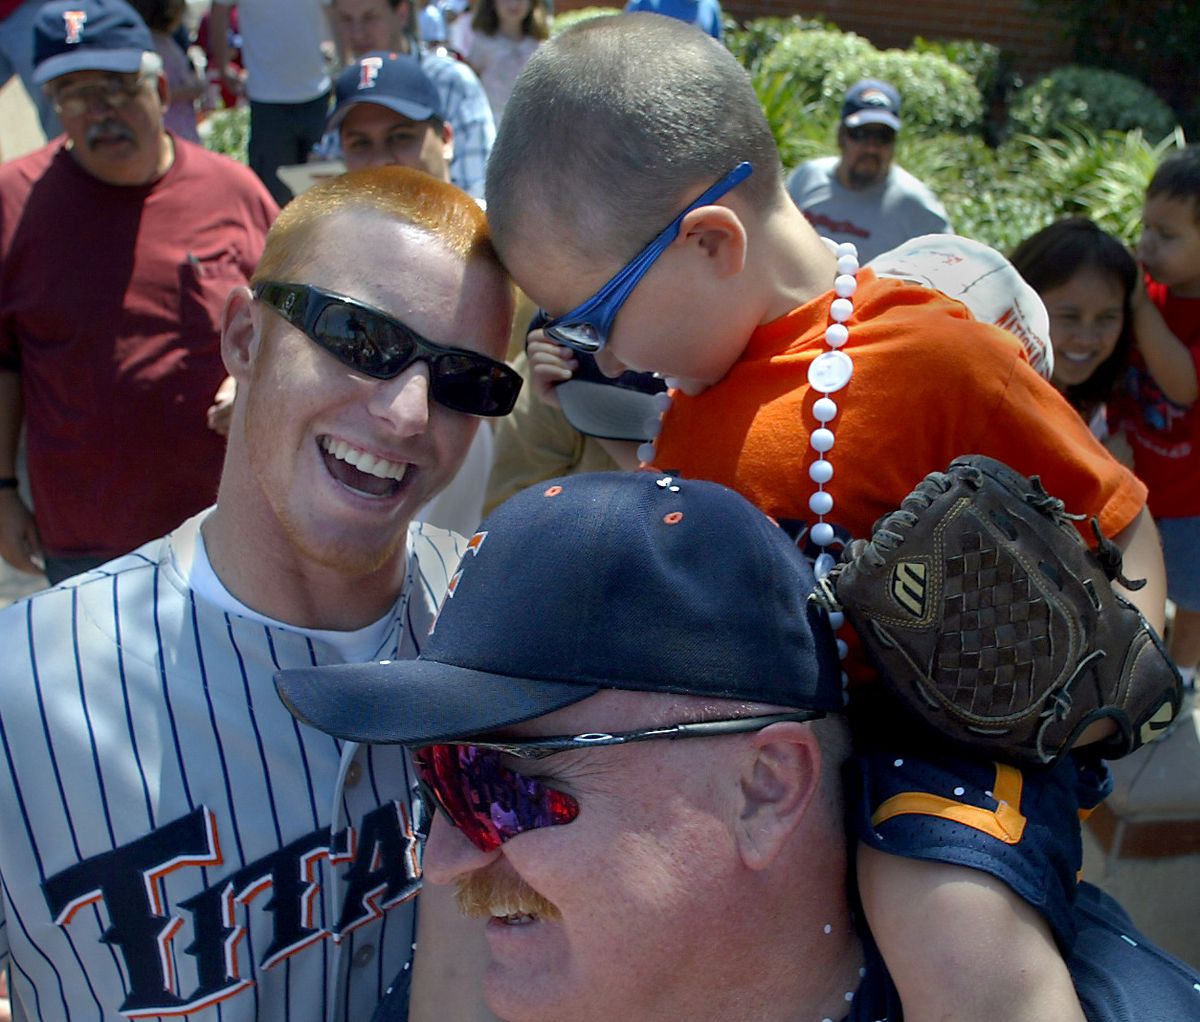 Cal State Fullerton baseball player Justin Turner, left, pals around by rubbing heads with little ba